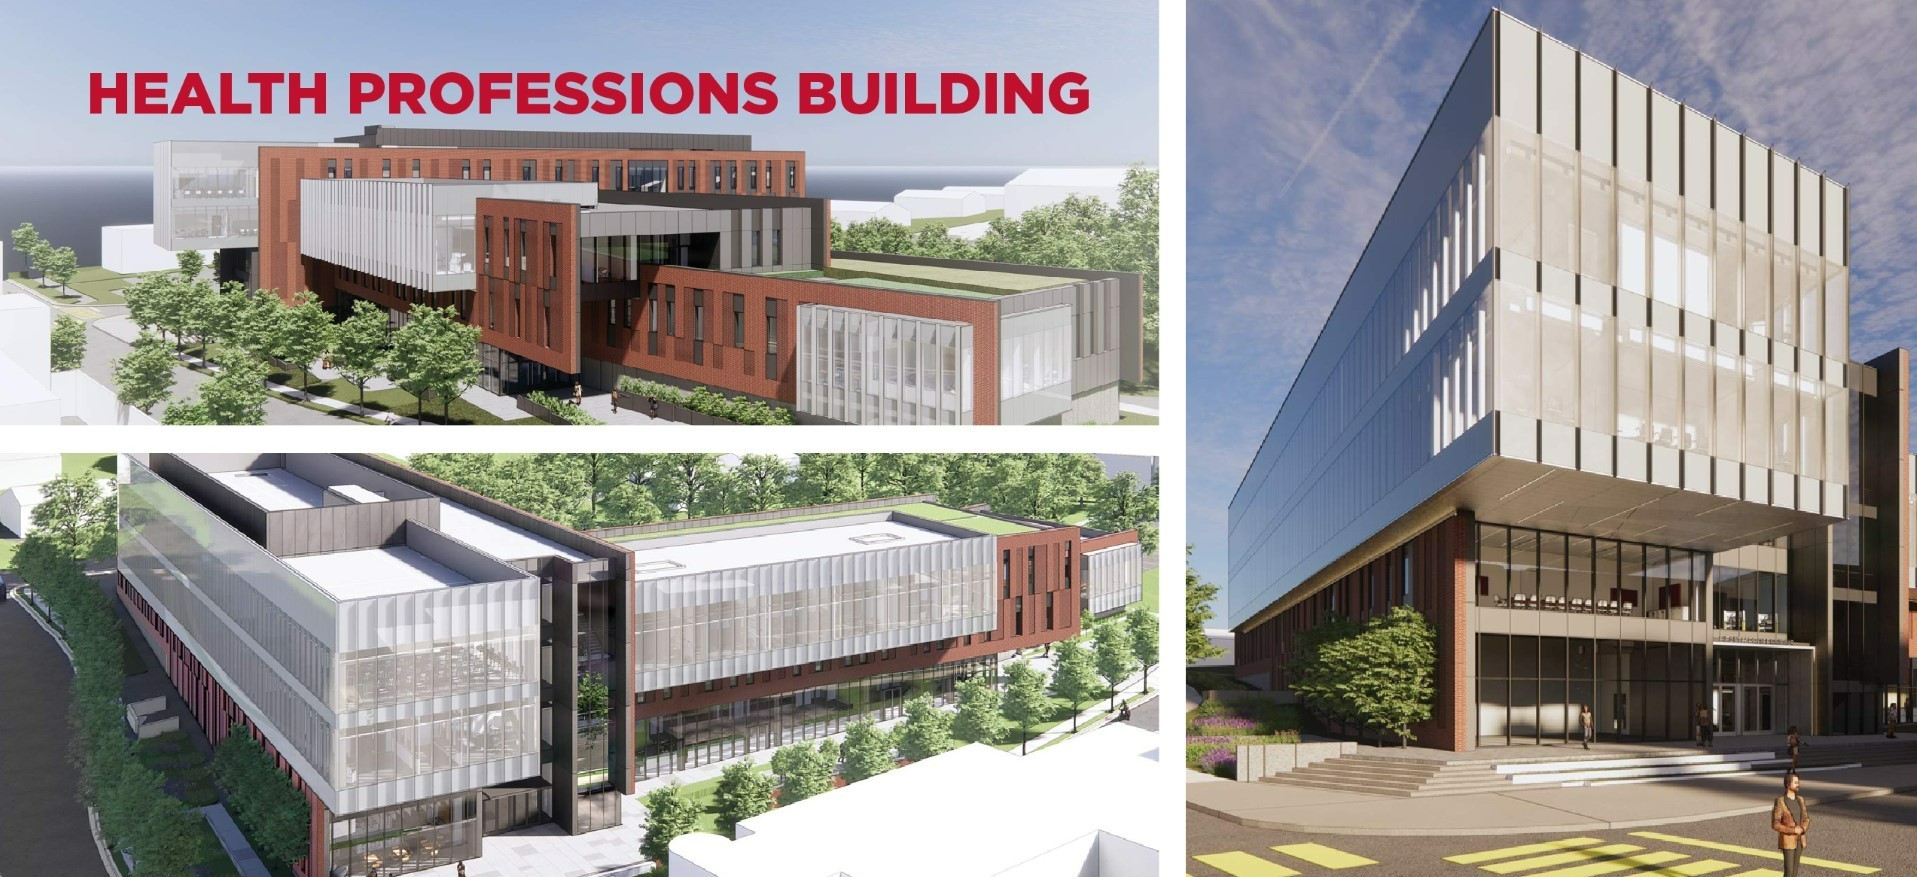 A rendering of APSU's upcoming Health Professions Building.